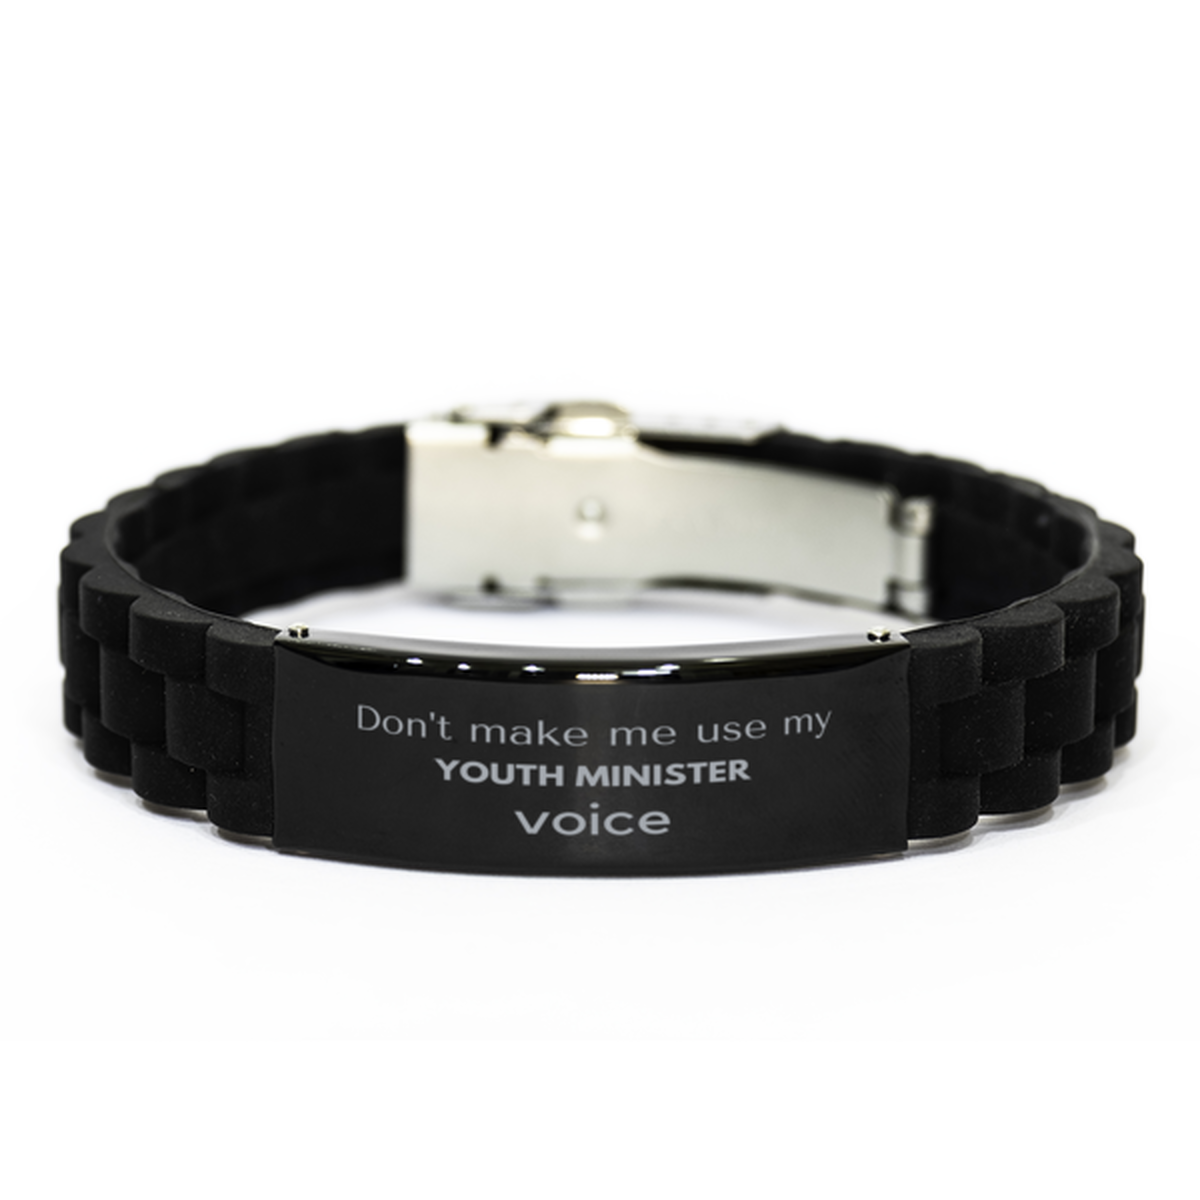 Don't make me use my Youth Minister voice, Sarcasm Youth Minister Gifts, Christmas Youth Minister Black Glidelock Clasp Bracelet Birthday Unique Gifts For Youth Minister Coworkers, Men, Women, Colleague, Friends